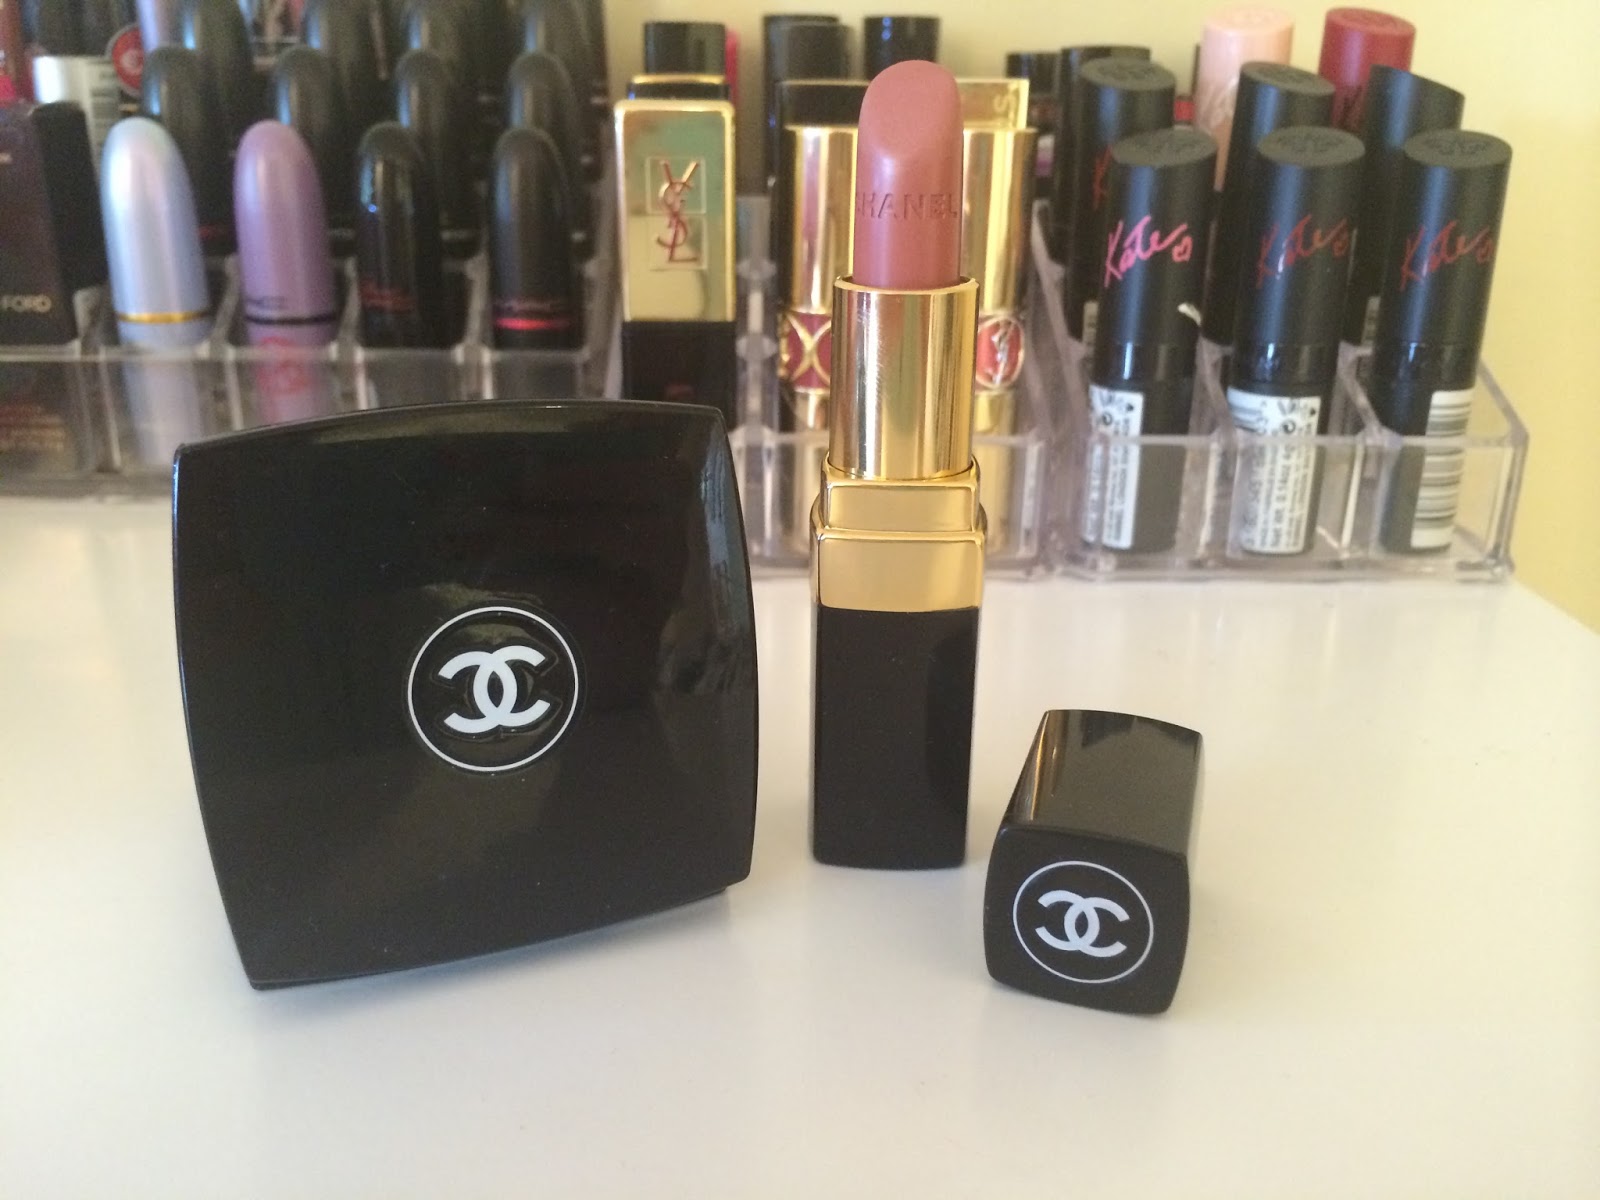 New Chanel Rouge Coco Lipstick Swatches & Review: Louise, Adrienne